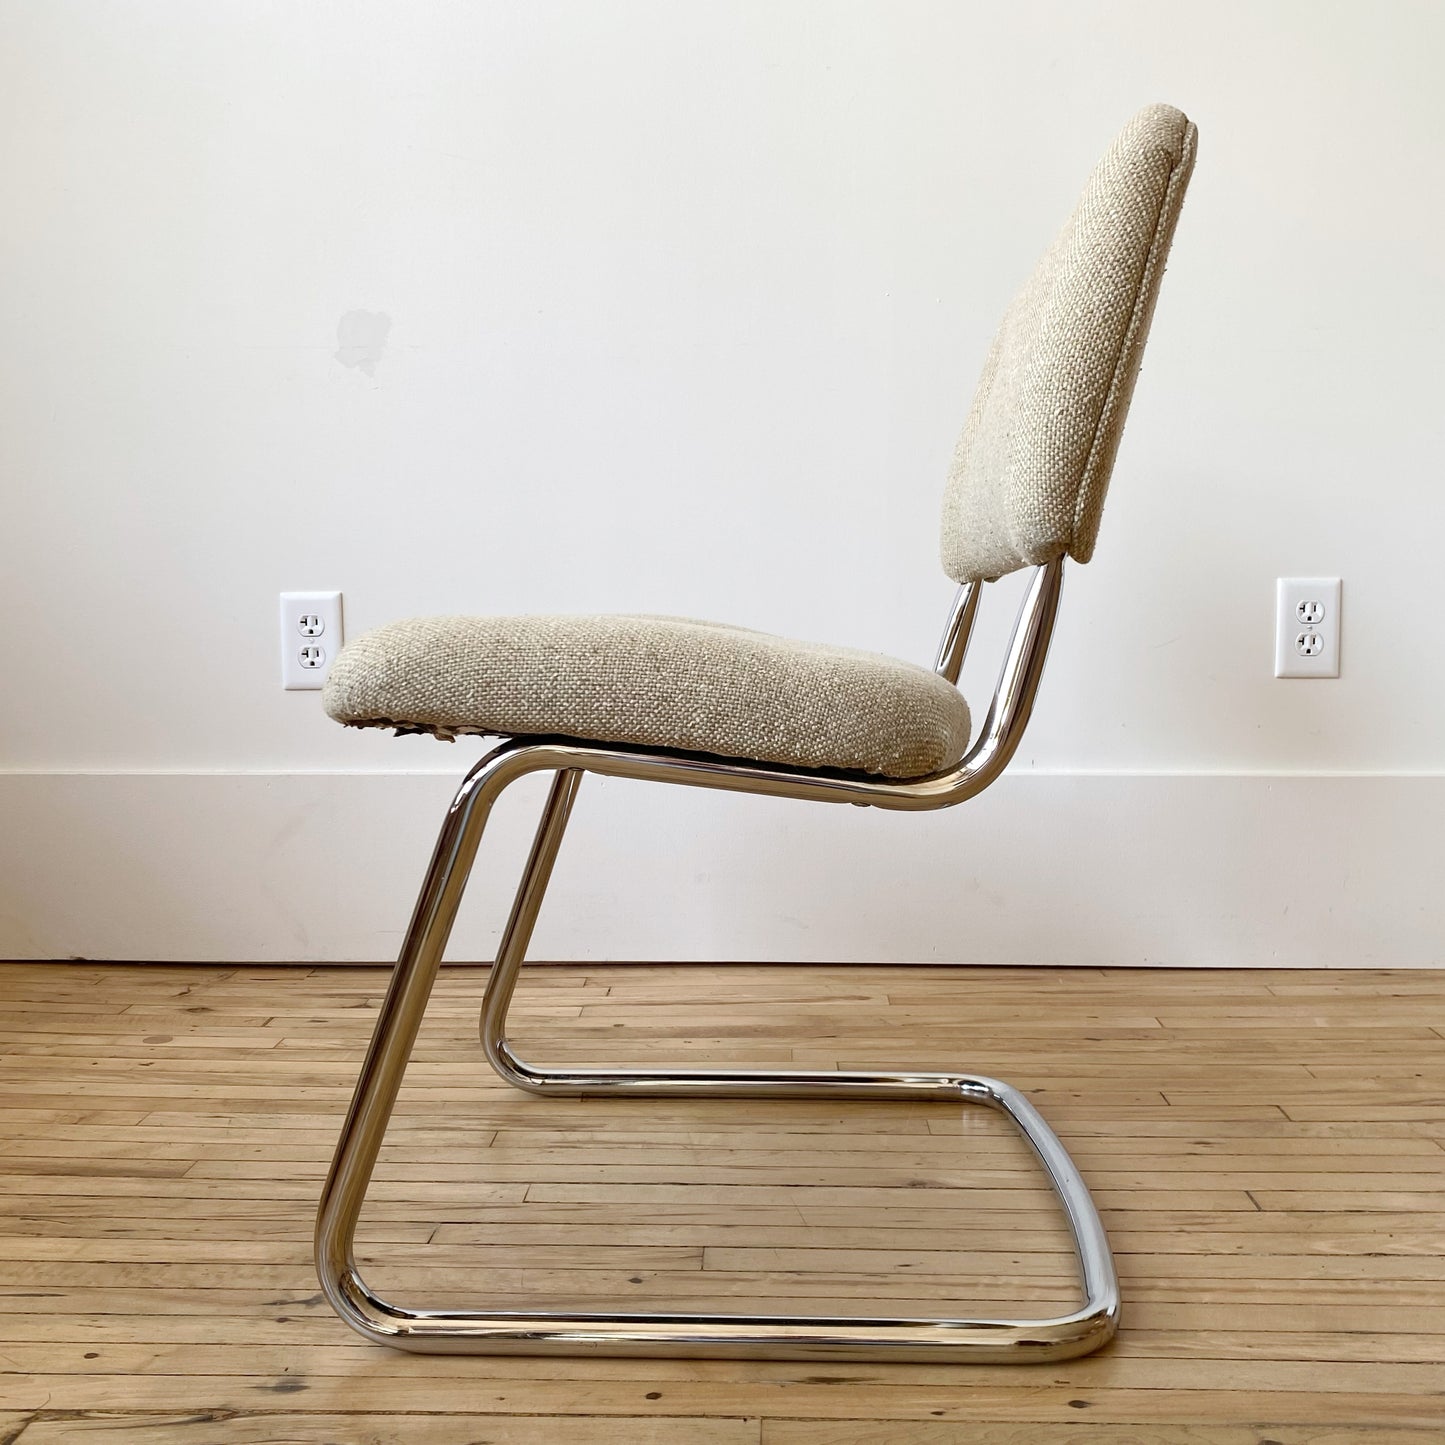 Vintage Cantilever Desk Chair by Steelcase